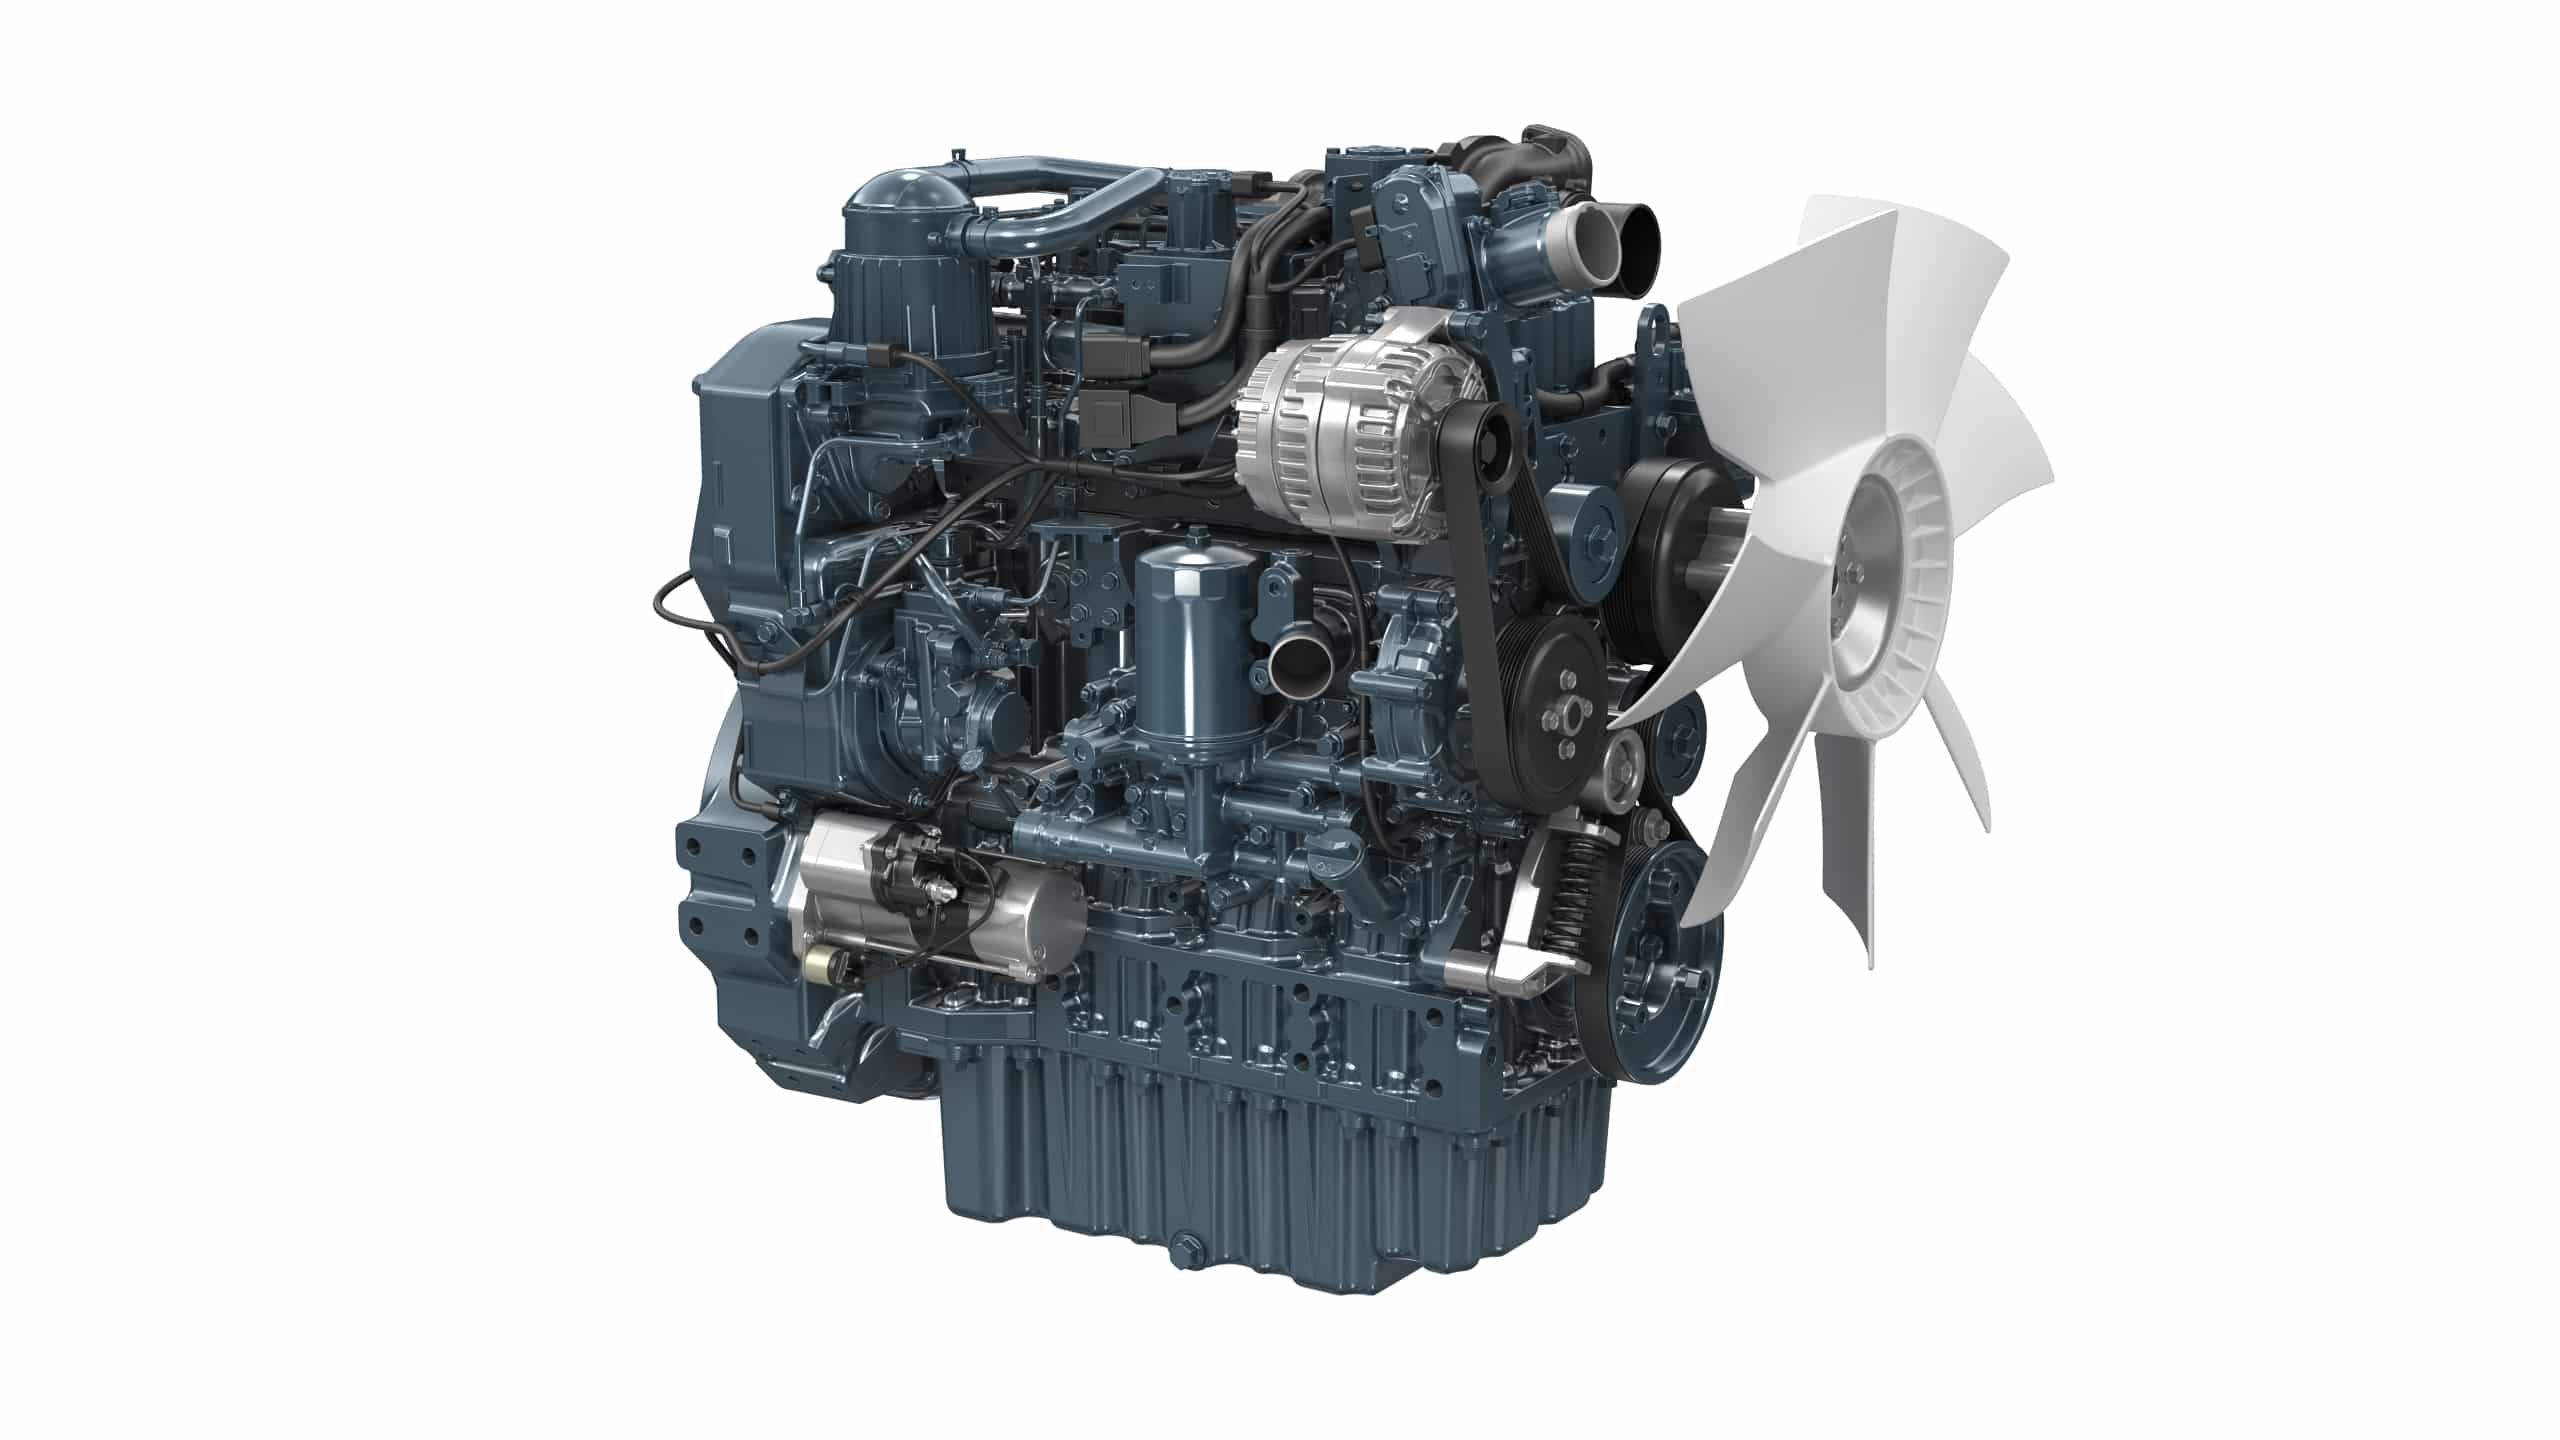 Kubota V5009 , a compact 5-litre engine with 157 kW at 2200 Rpm